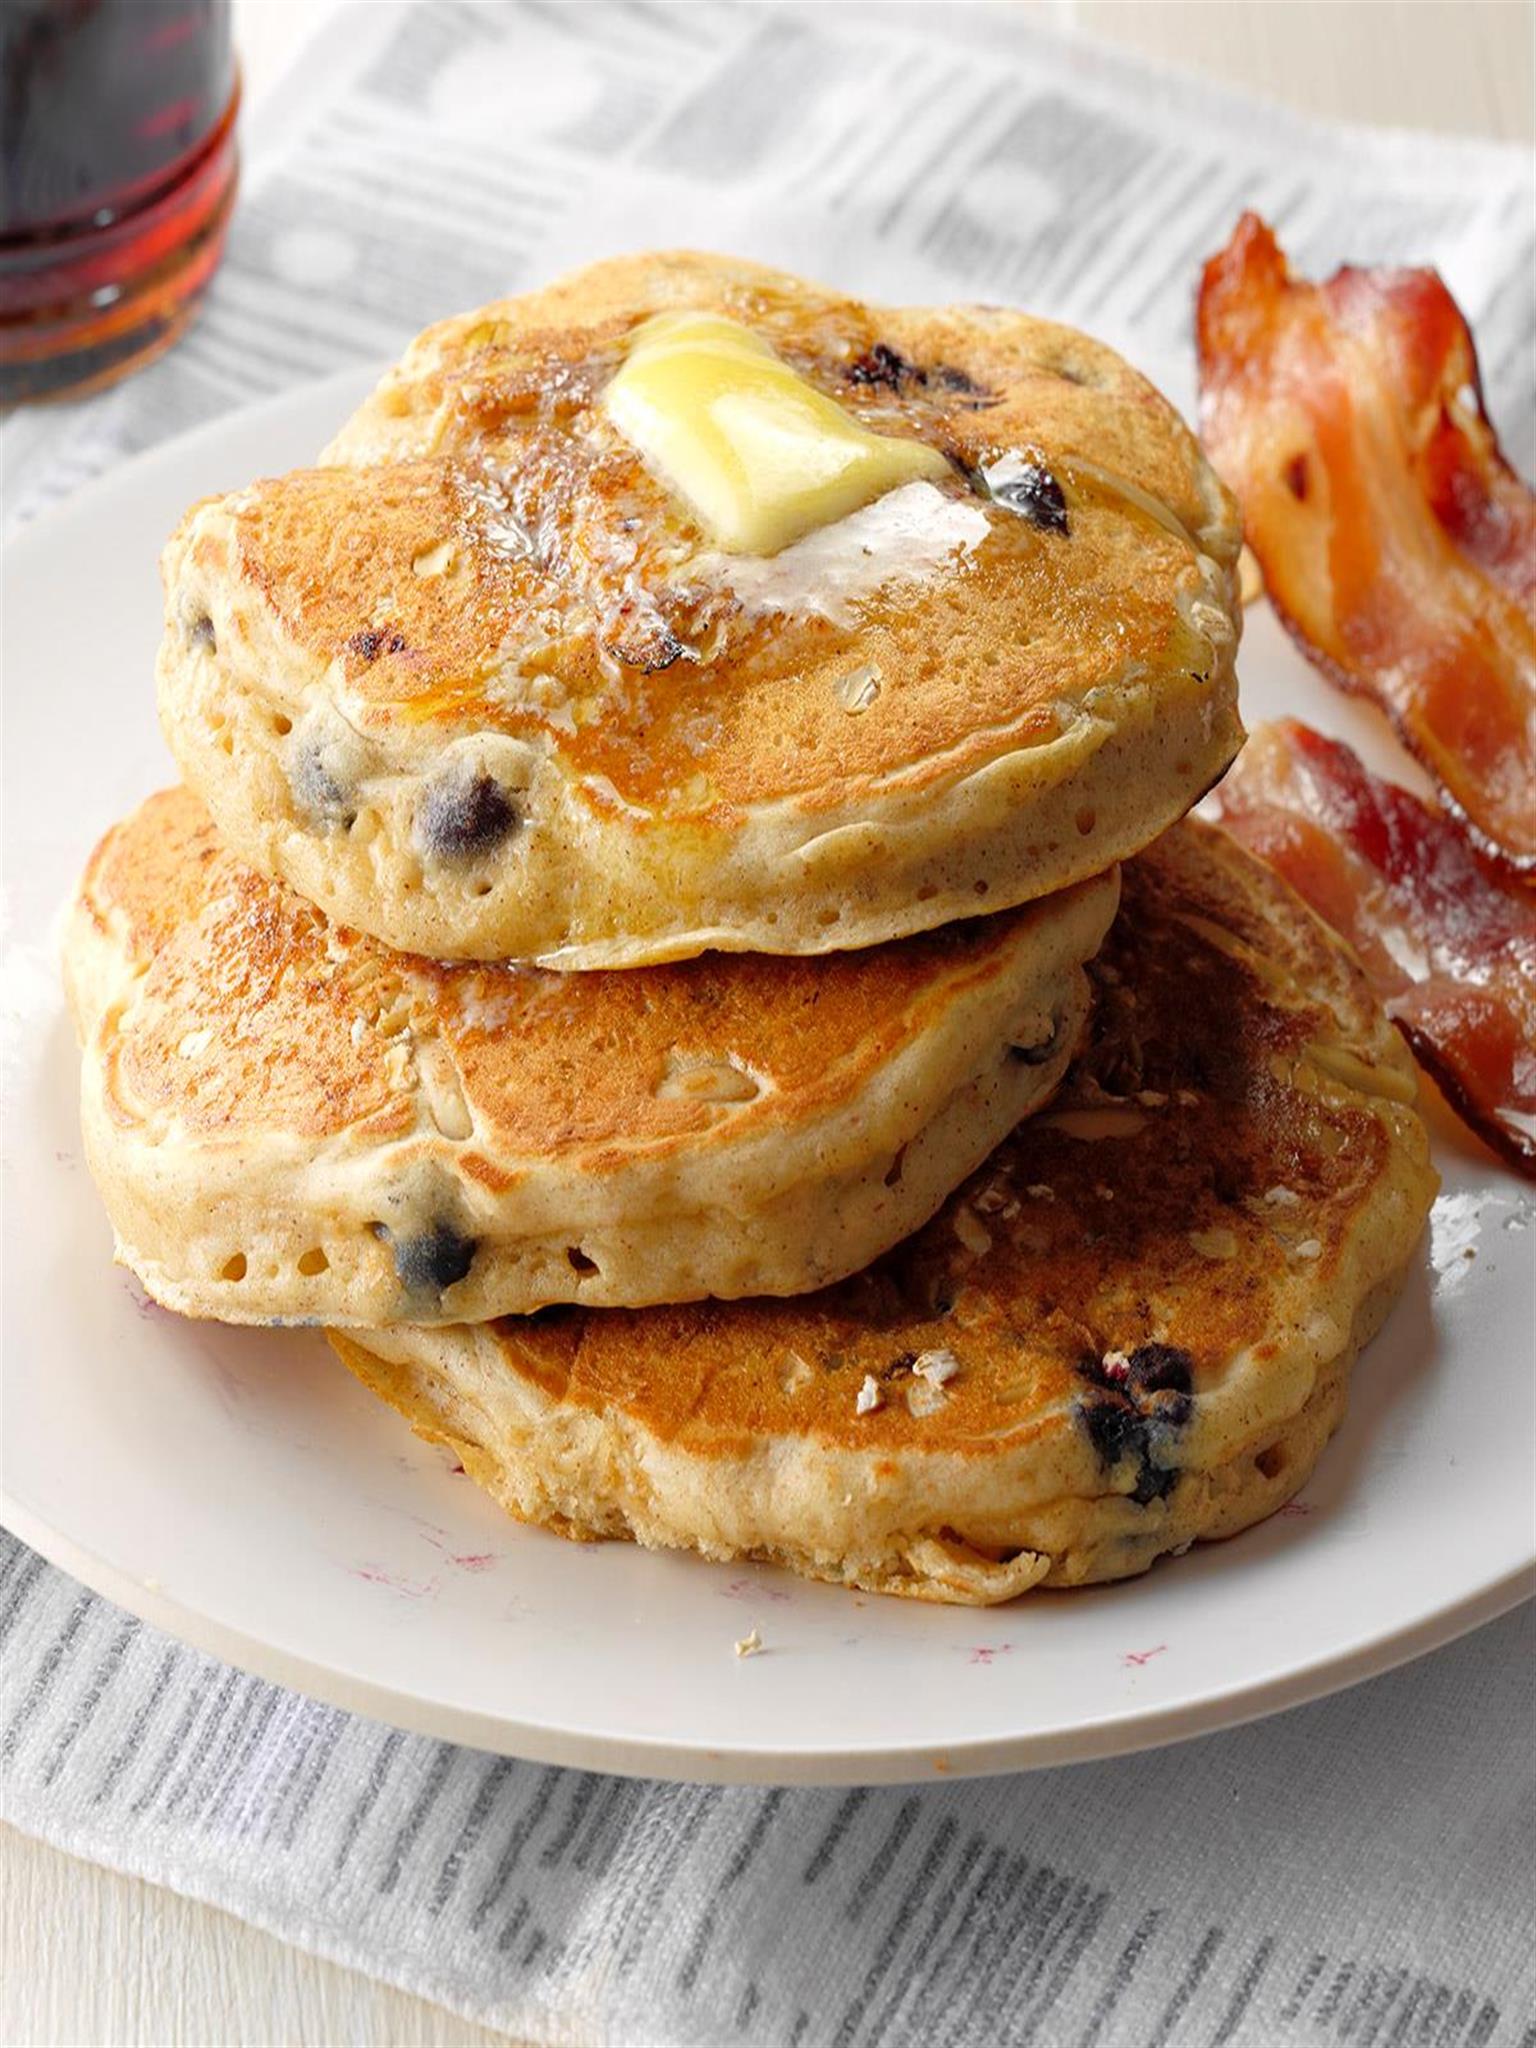 Country Crunch Pancakes Recipe: How to Make It